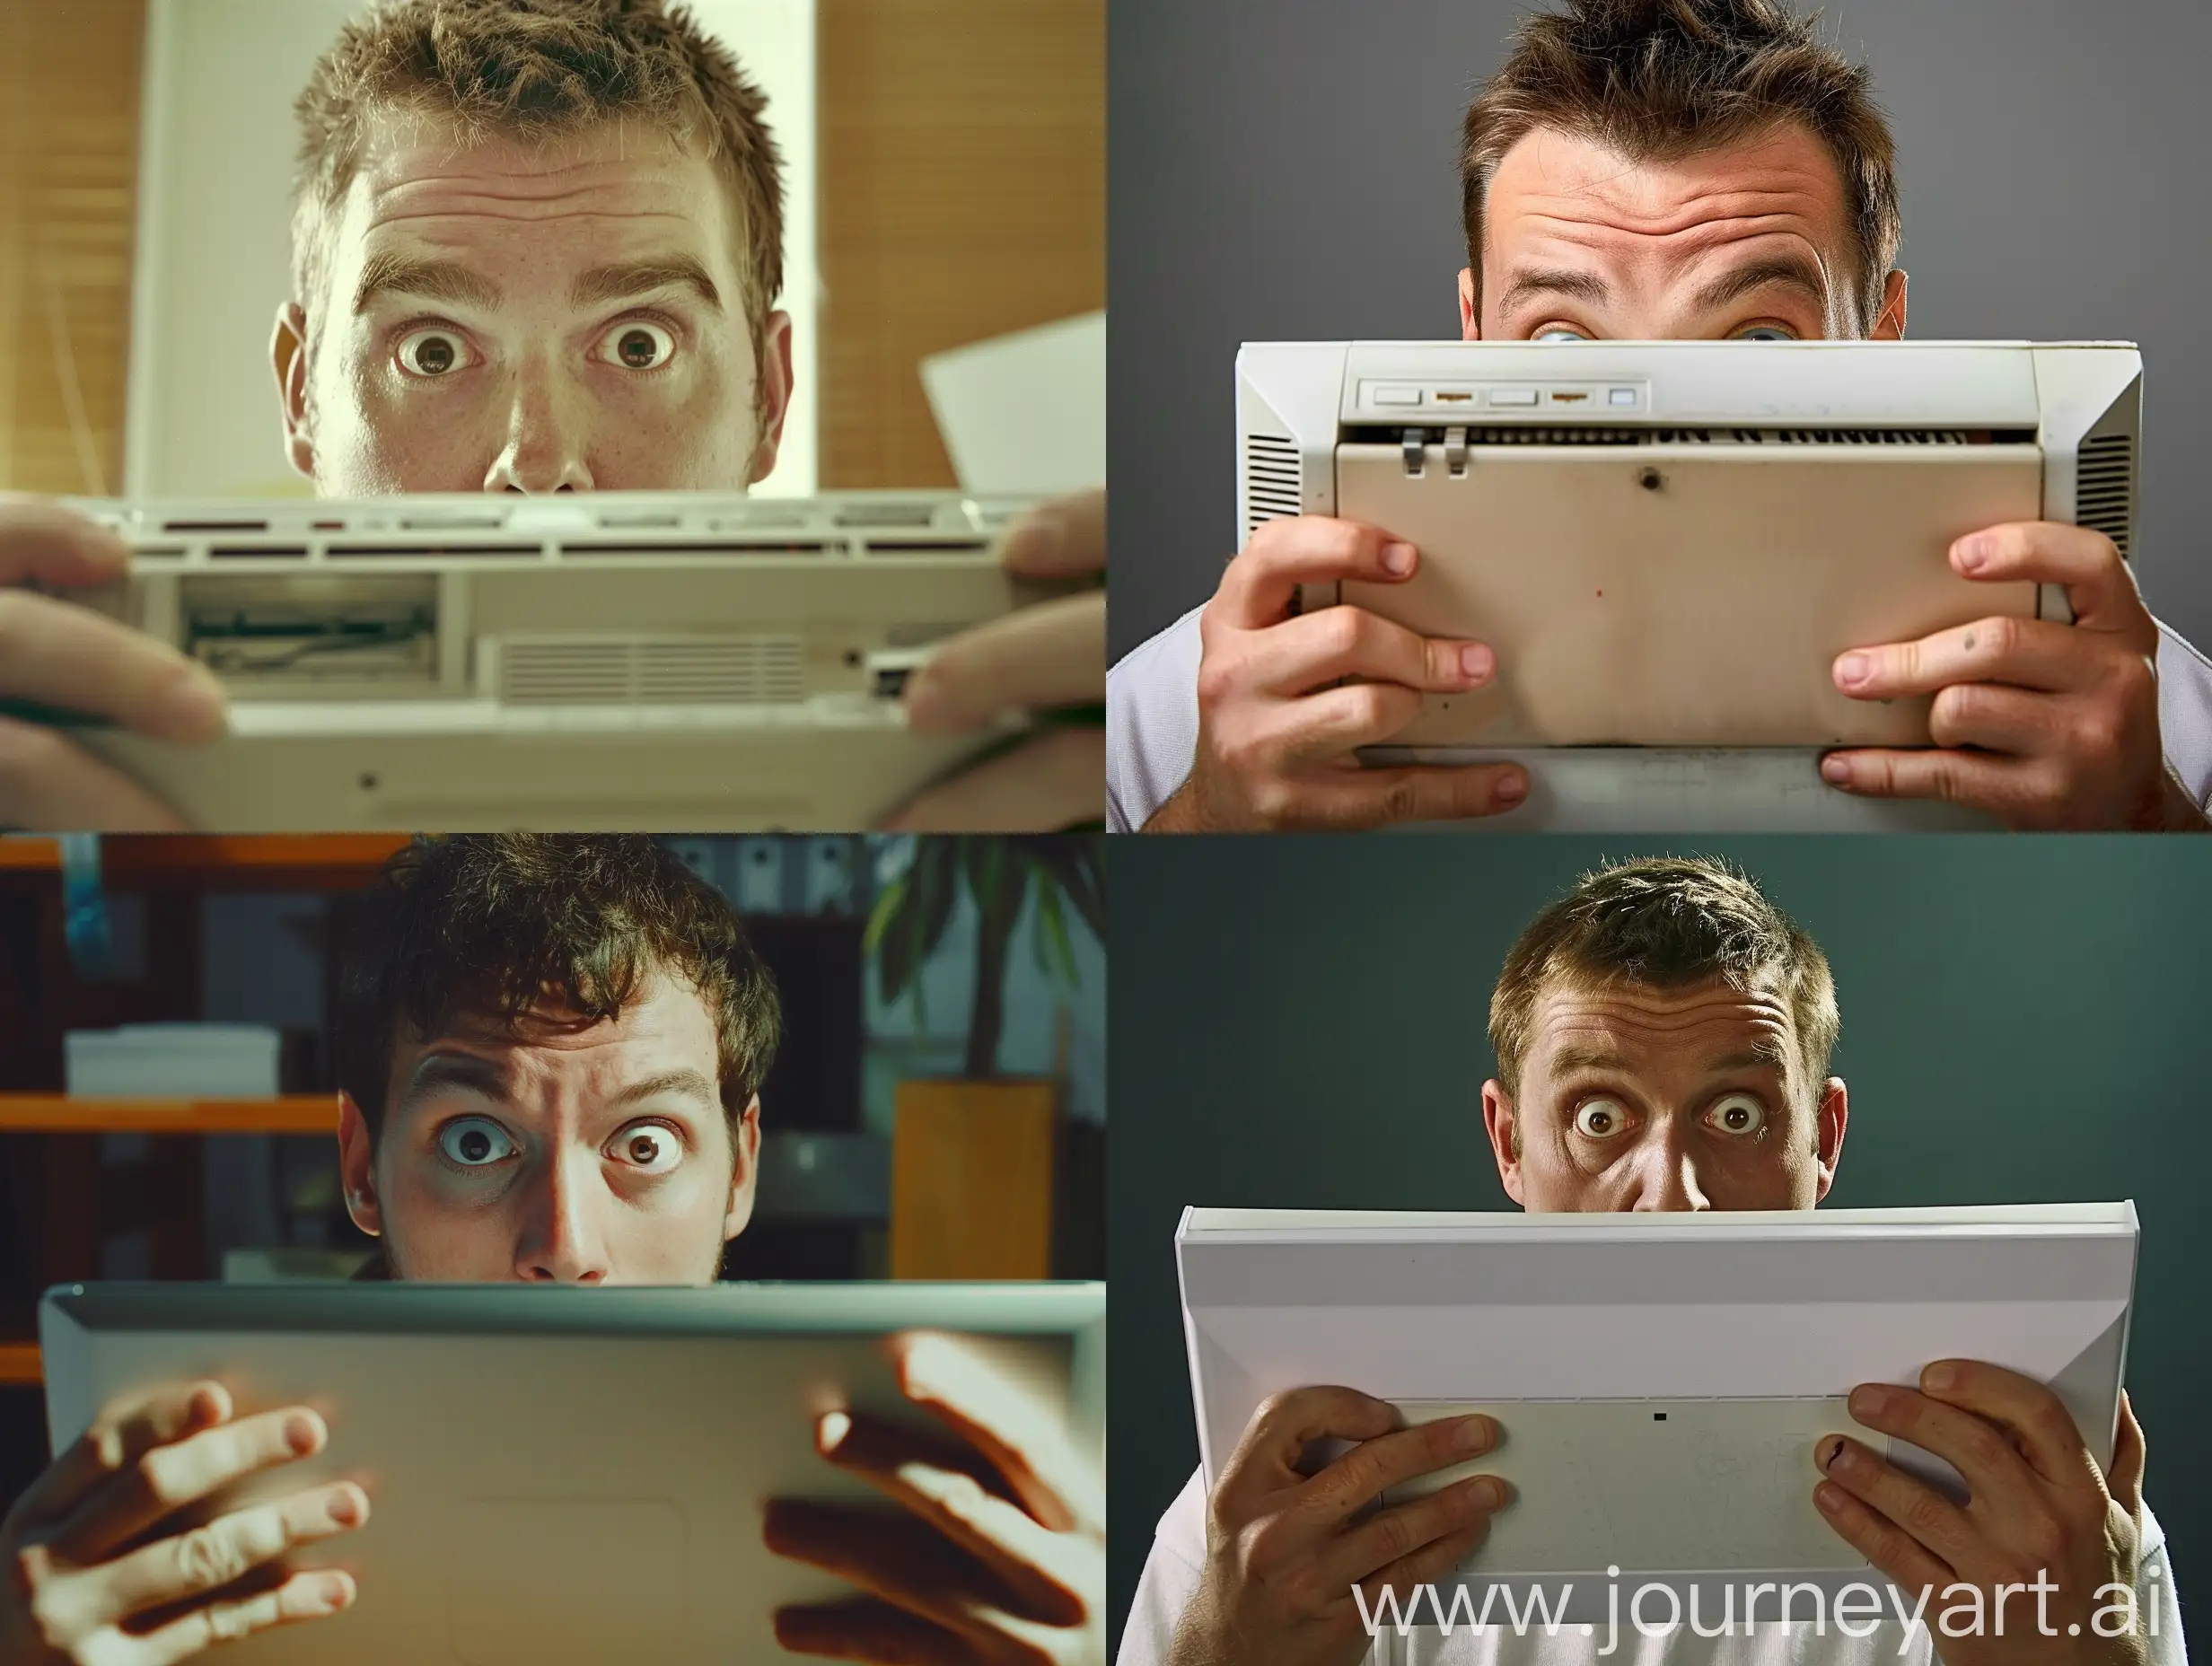 for a youtube miniature: a man, European type, short brown hair, brown eyes, holding a computer in his hands, looking shocked (eyes wide open, mouth open) at what he sees on the computer.